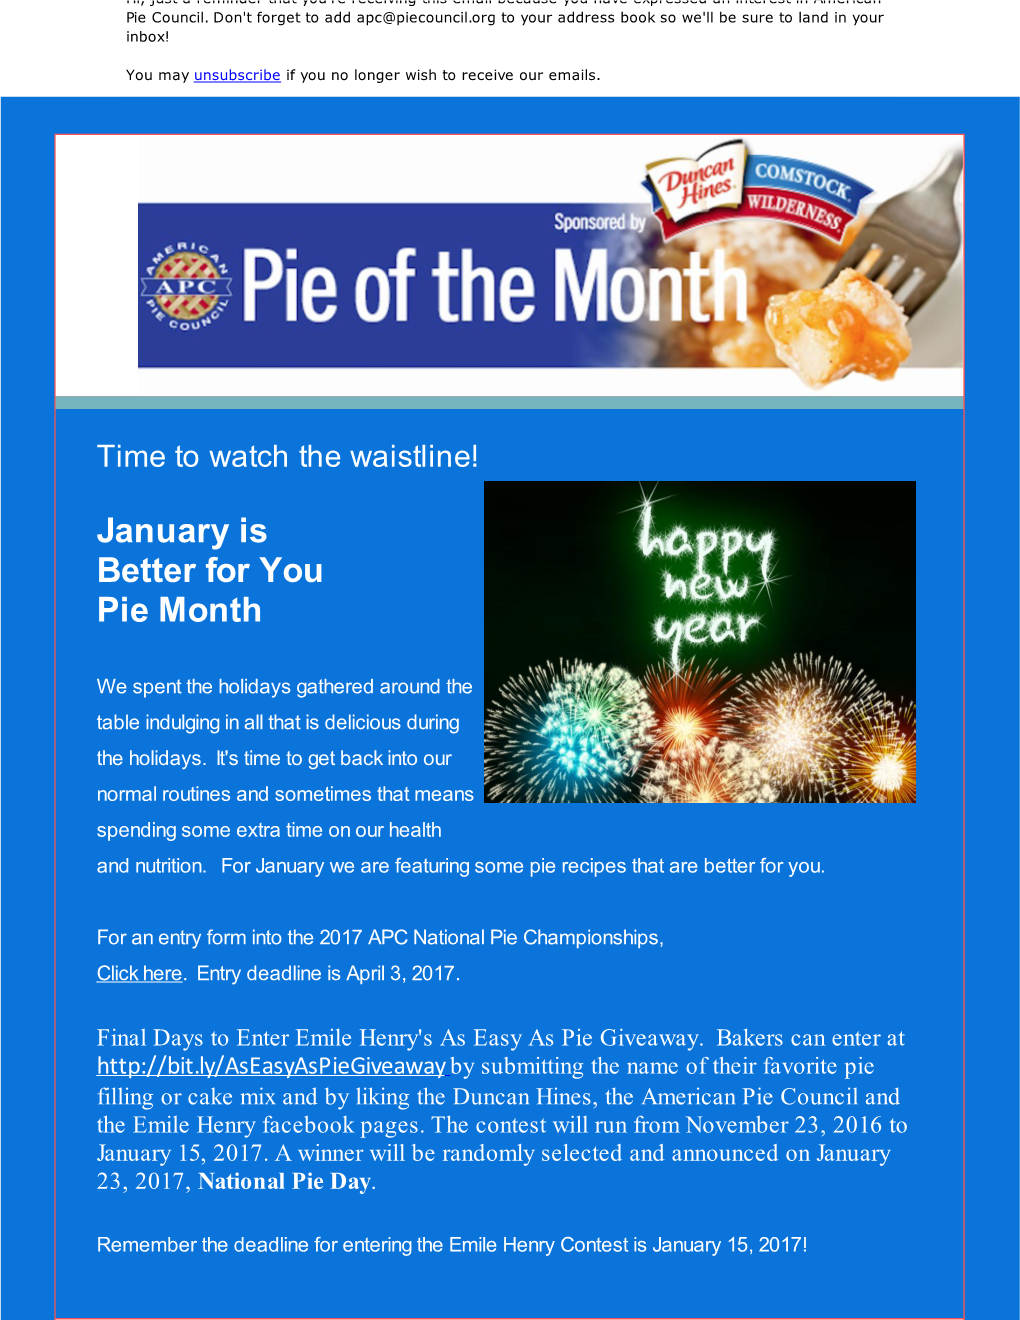 January Is Better for You Pie Month